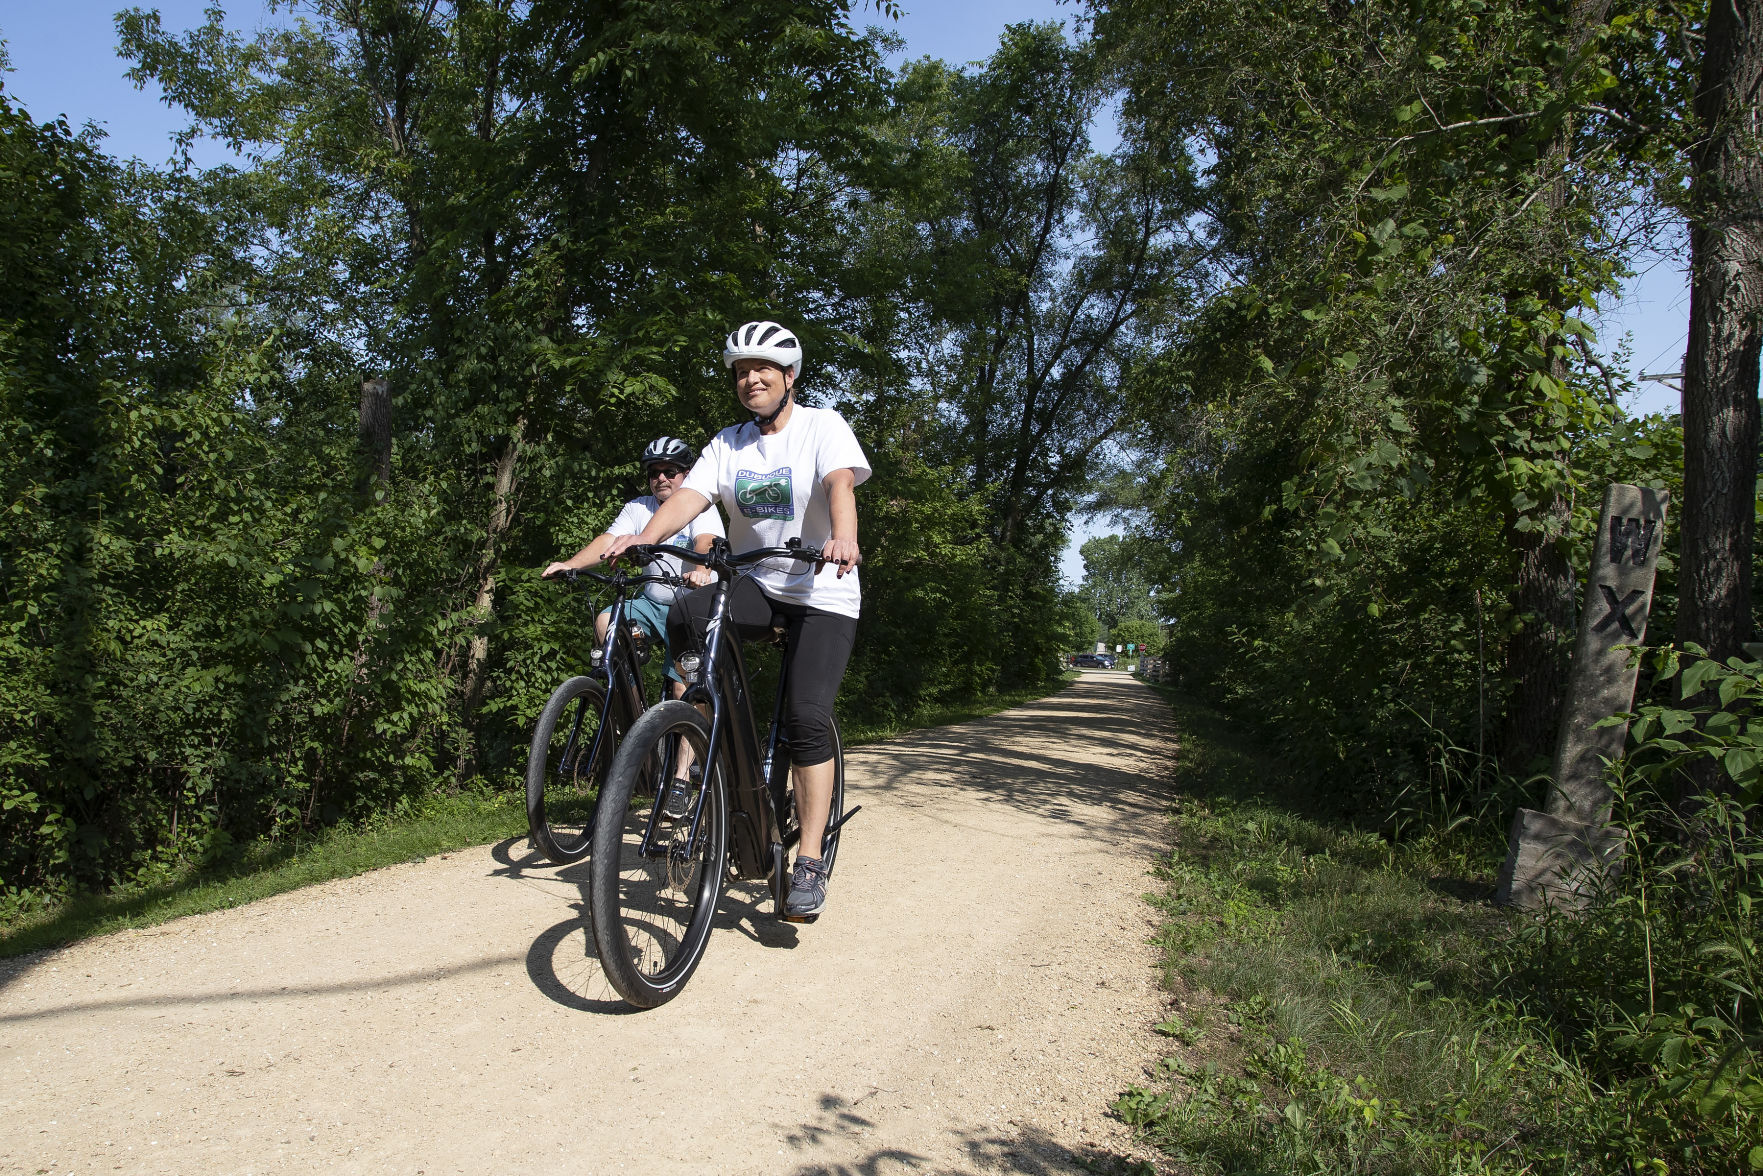 Sherri and John Driscoll ride along Herritage Trail with two of the electric assist bikes available to rent from their company Dubuque E-Bikes on Friday, July 2, 2021.    PHOTO CREDIT: Stephen Gassman